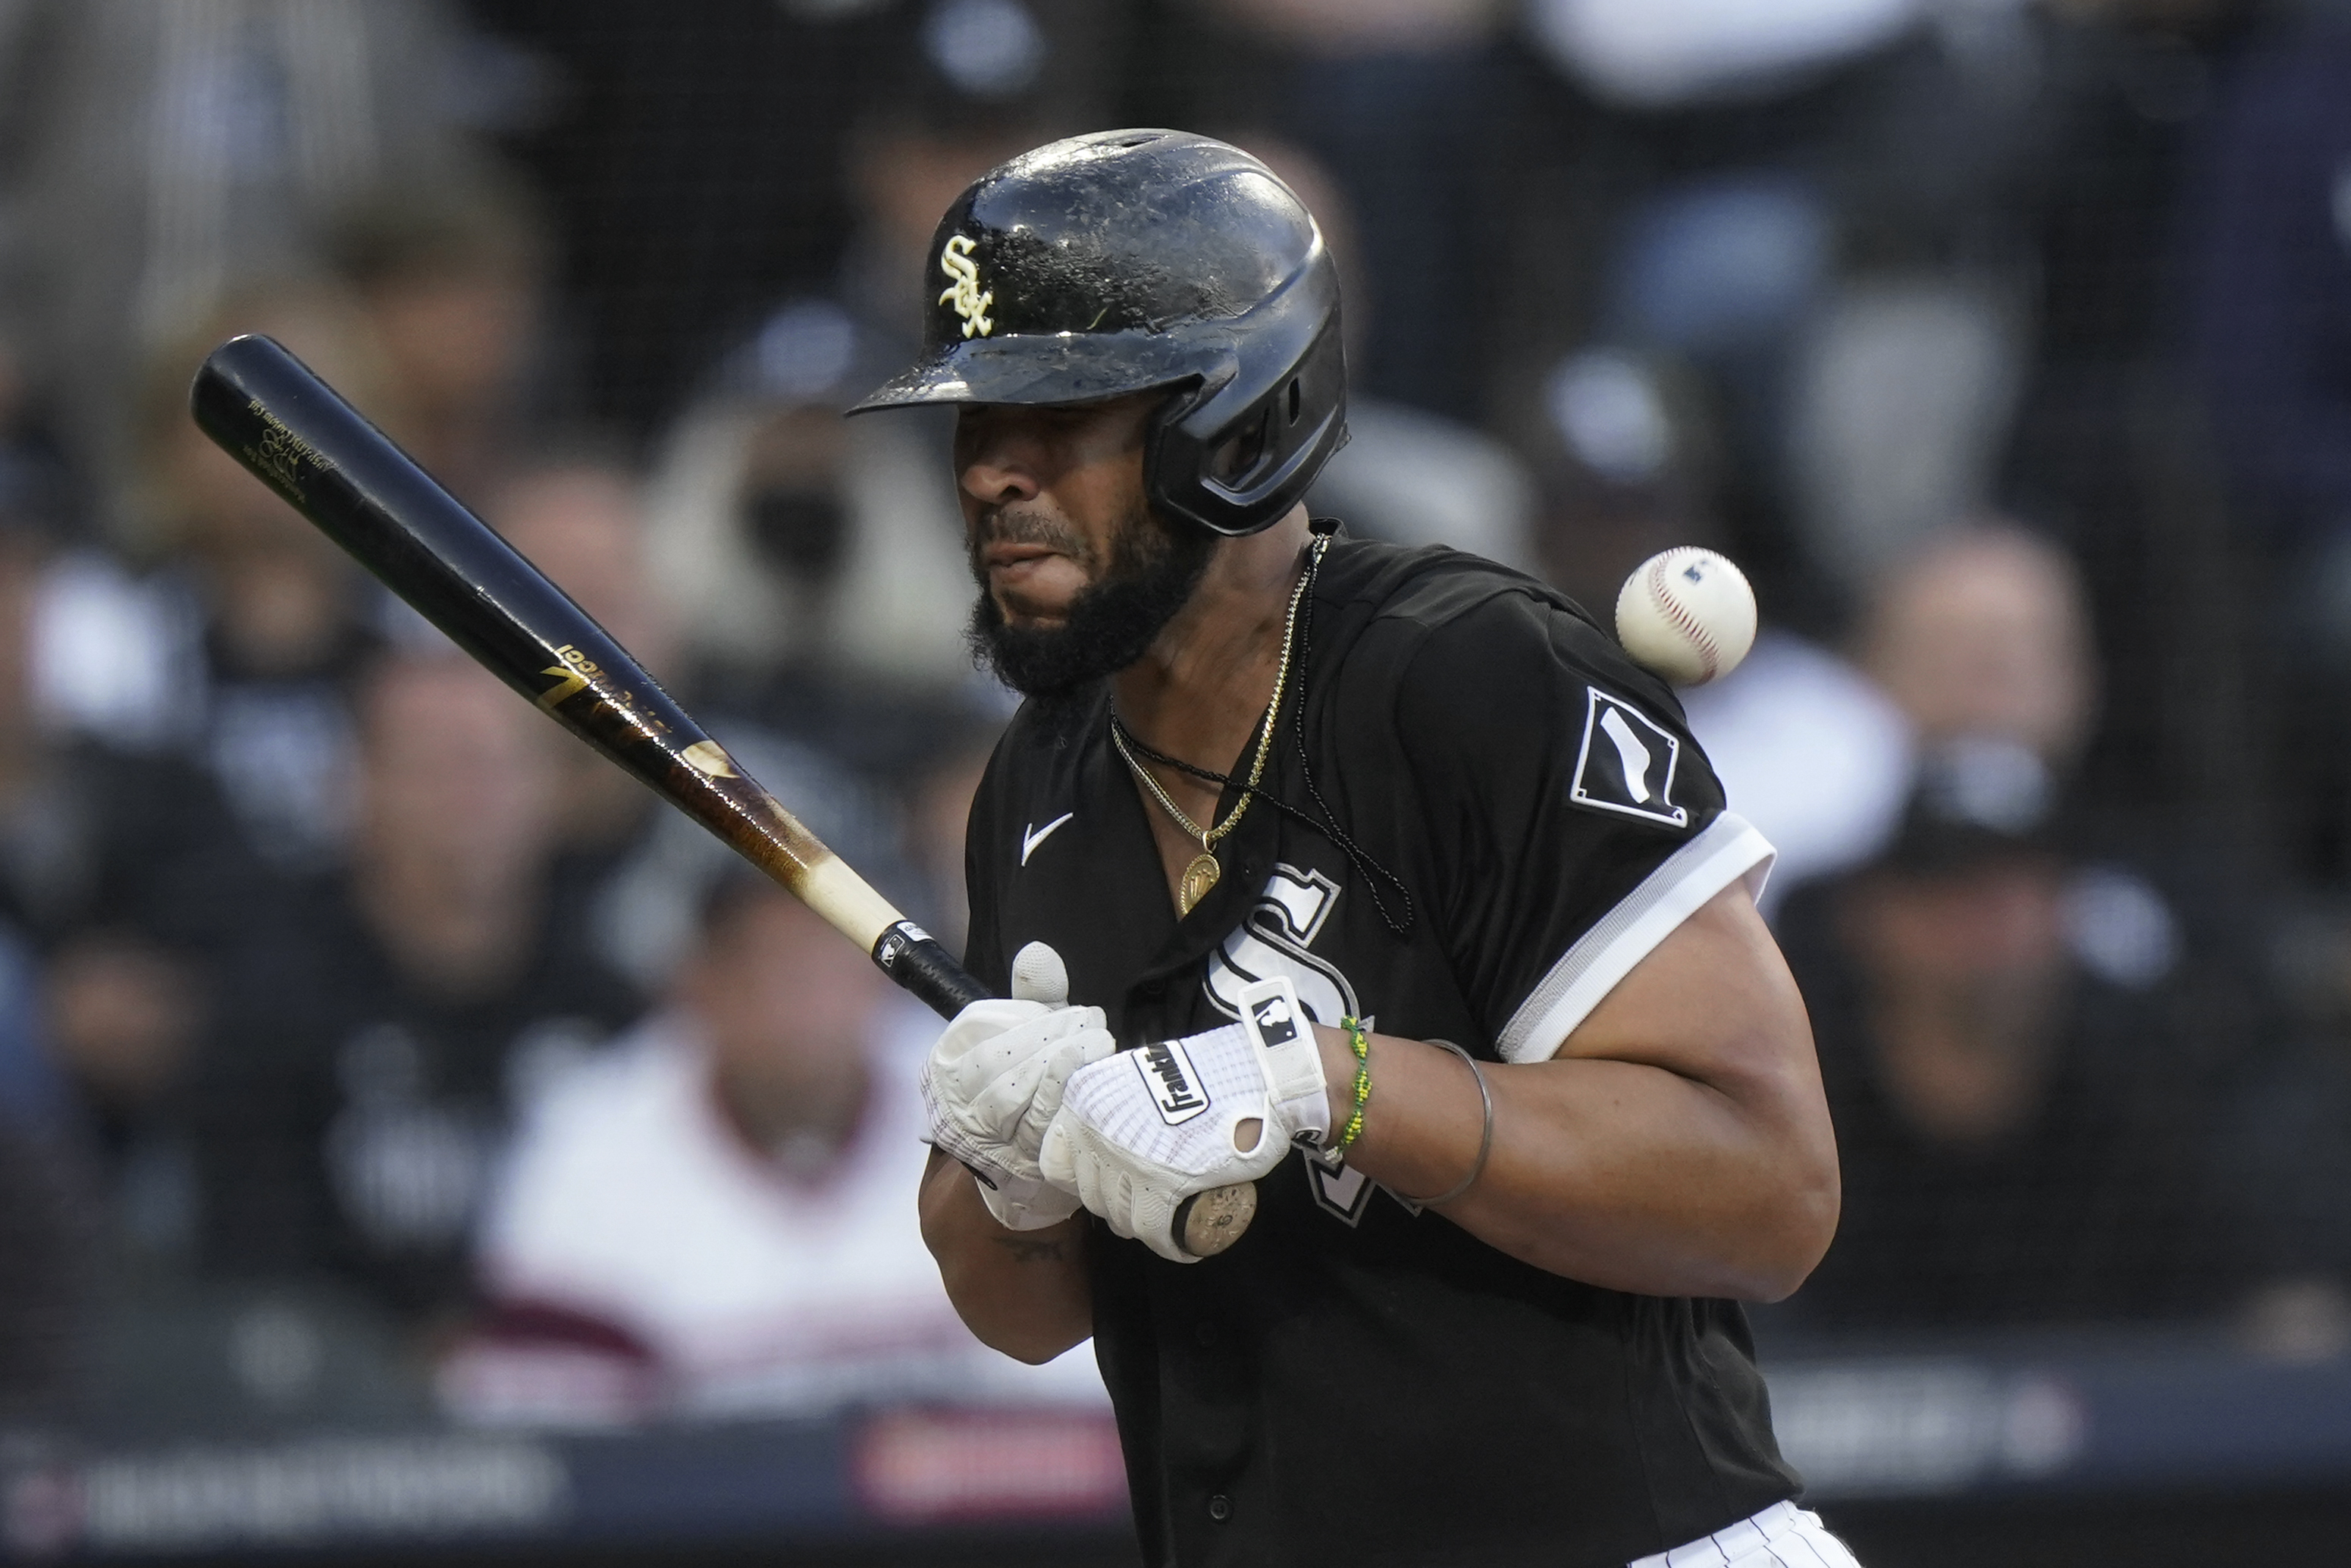 Why the White Sox are letting Jose Abreu, their best hitter, go to Houston